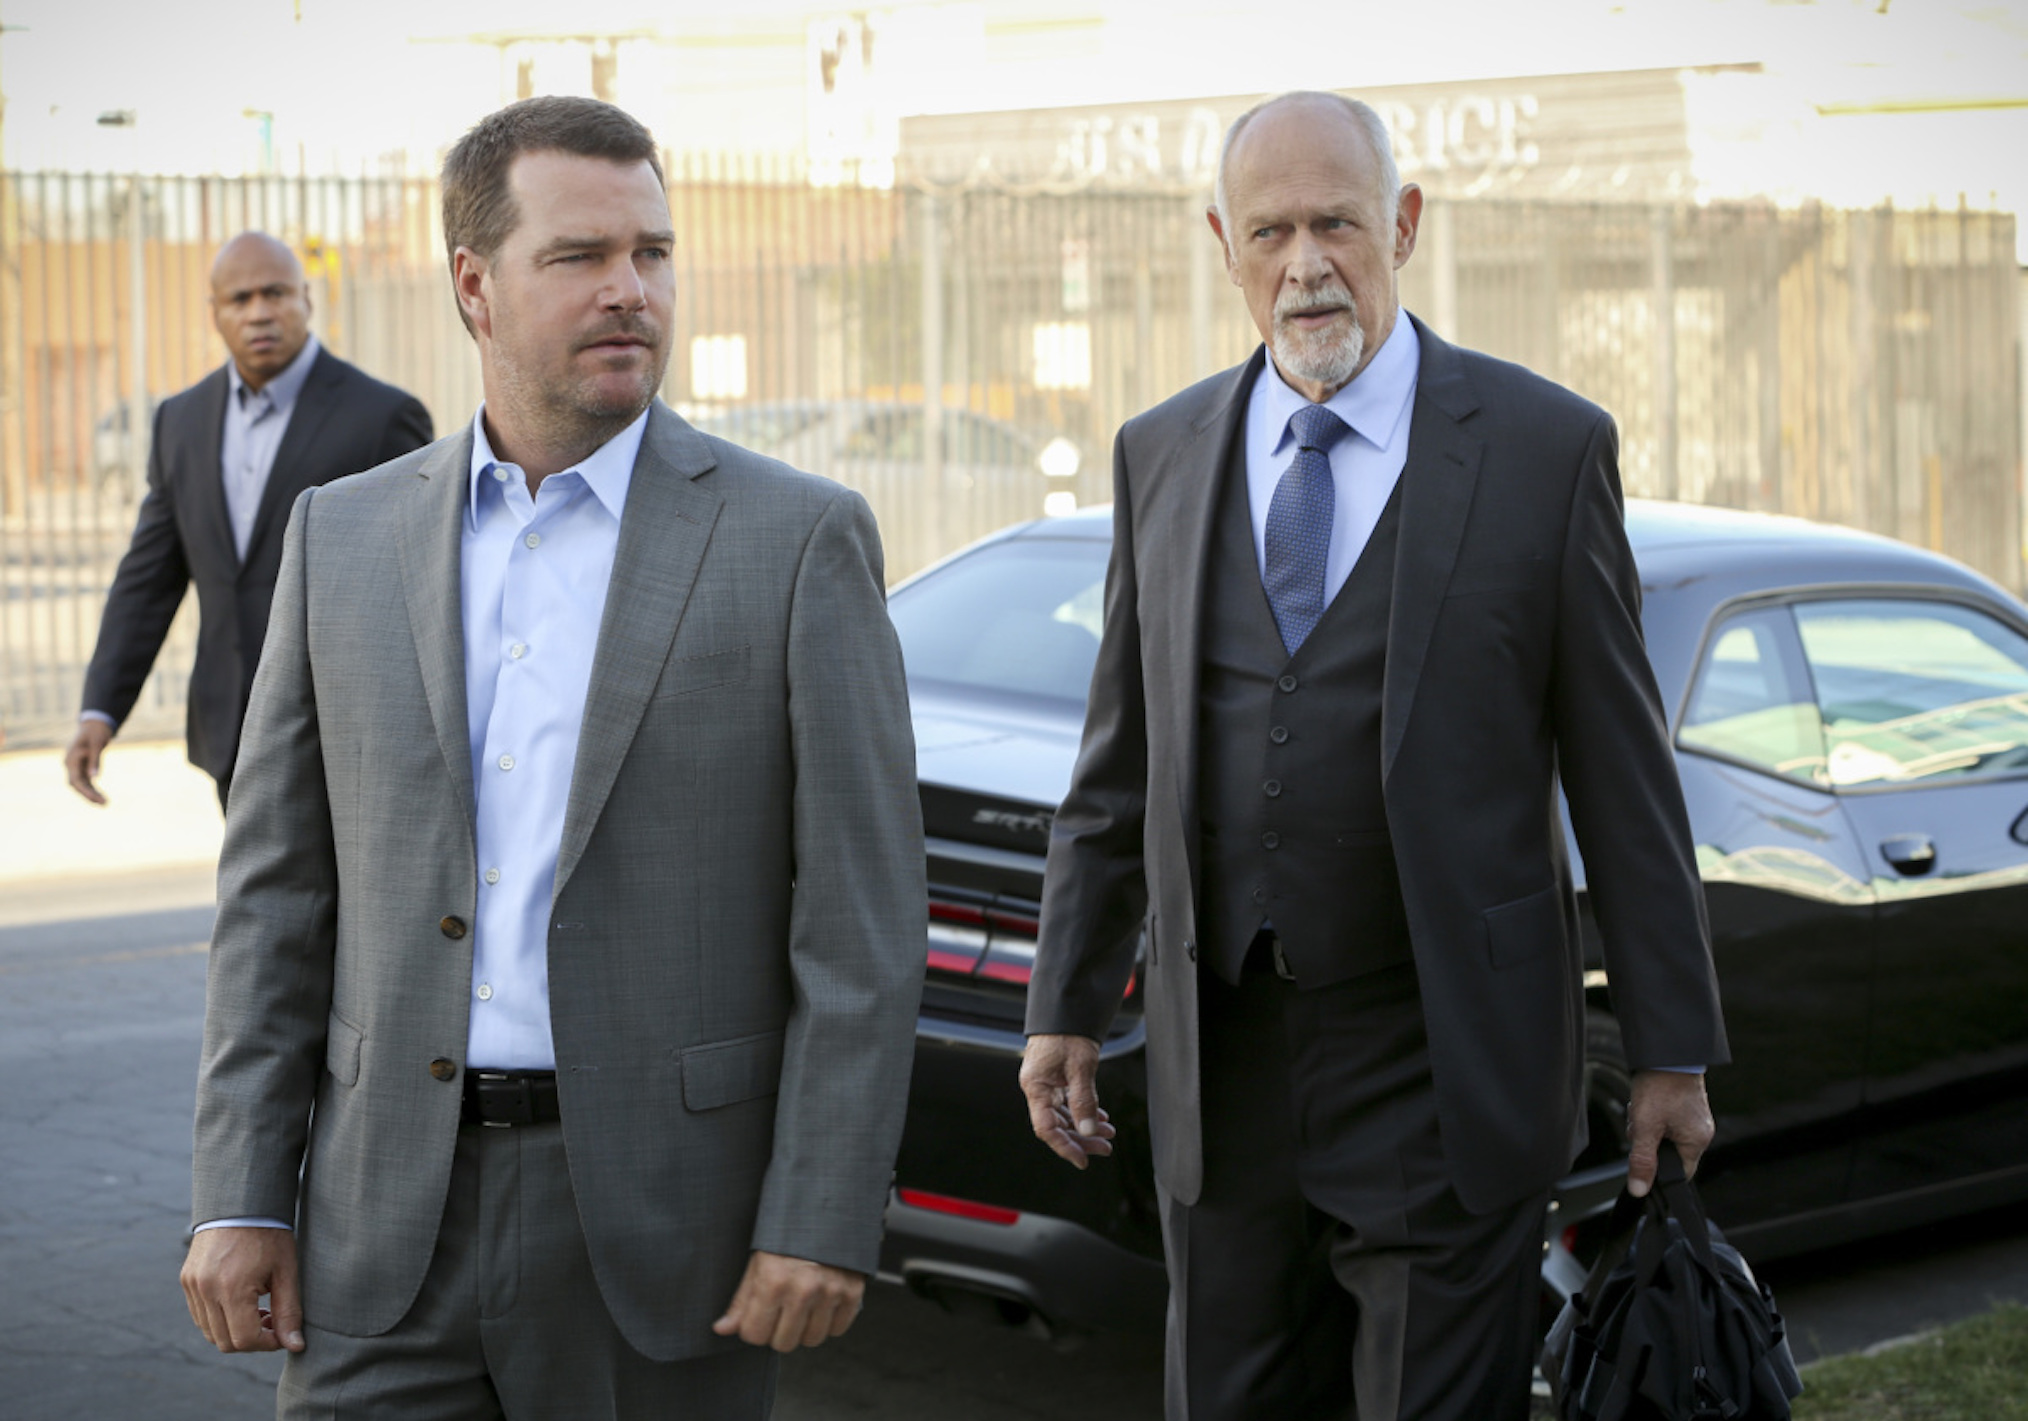 LL Cool J as Sam, Chris O'Donnell as Callen, Gerald McRaney as Kilbride in NCIS Los Angeles